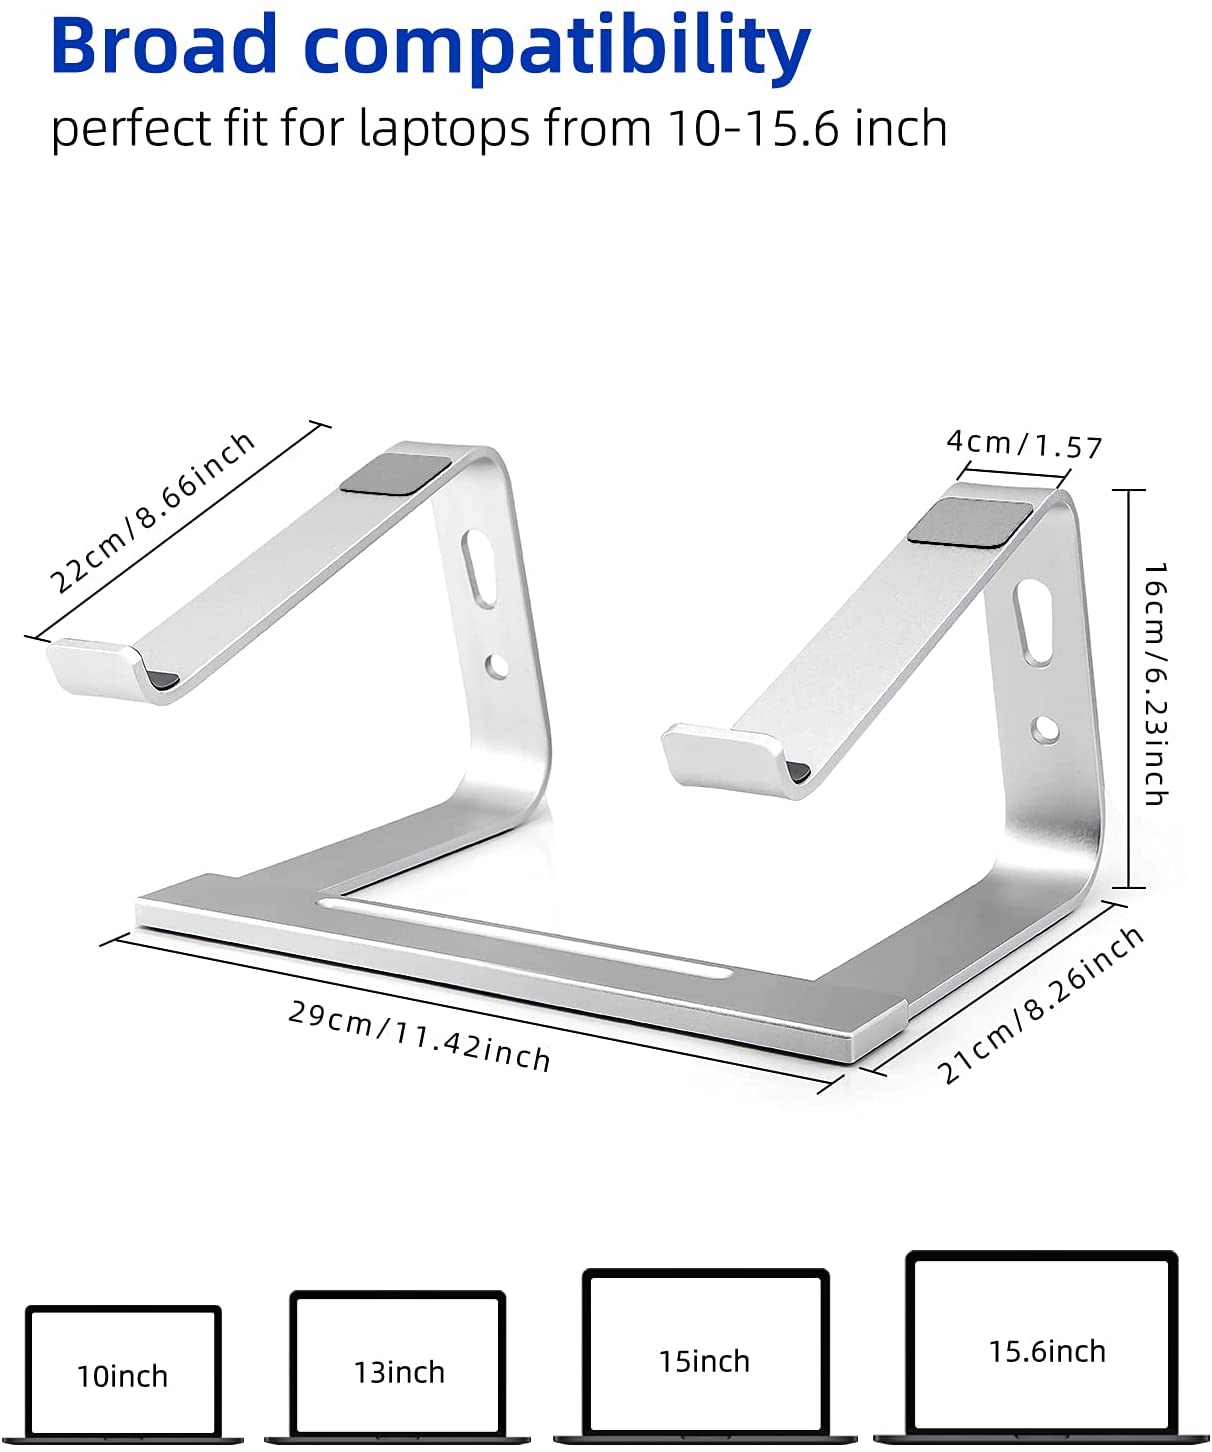 Laptop Stand, Computer Stand for Laptop, Aluminium Laptop Riser, Ergonomic Laptop Holder Compatible with MacBook Air Pro, Dell XPS, More 10-17 Inch Laptops Work from Home